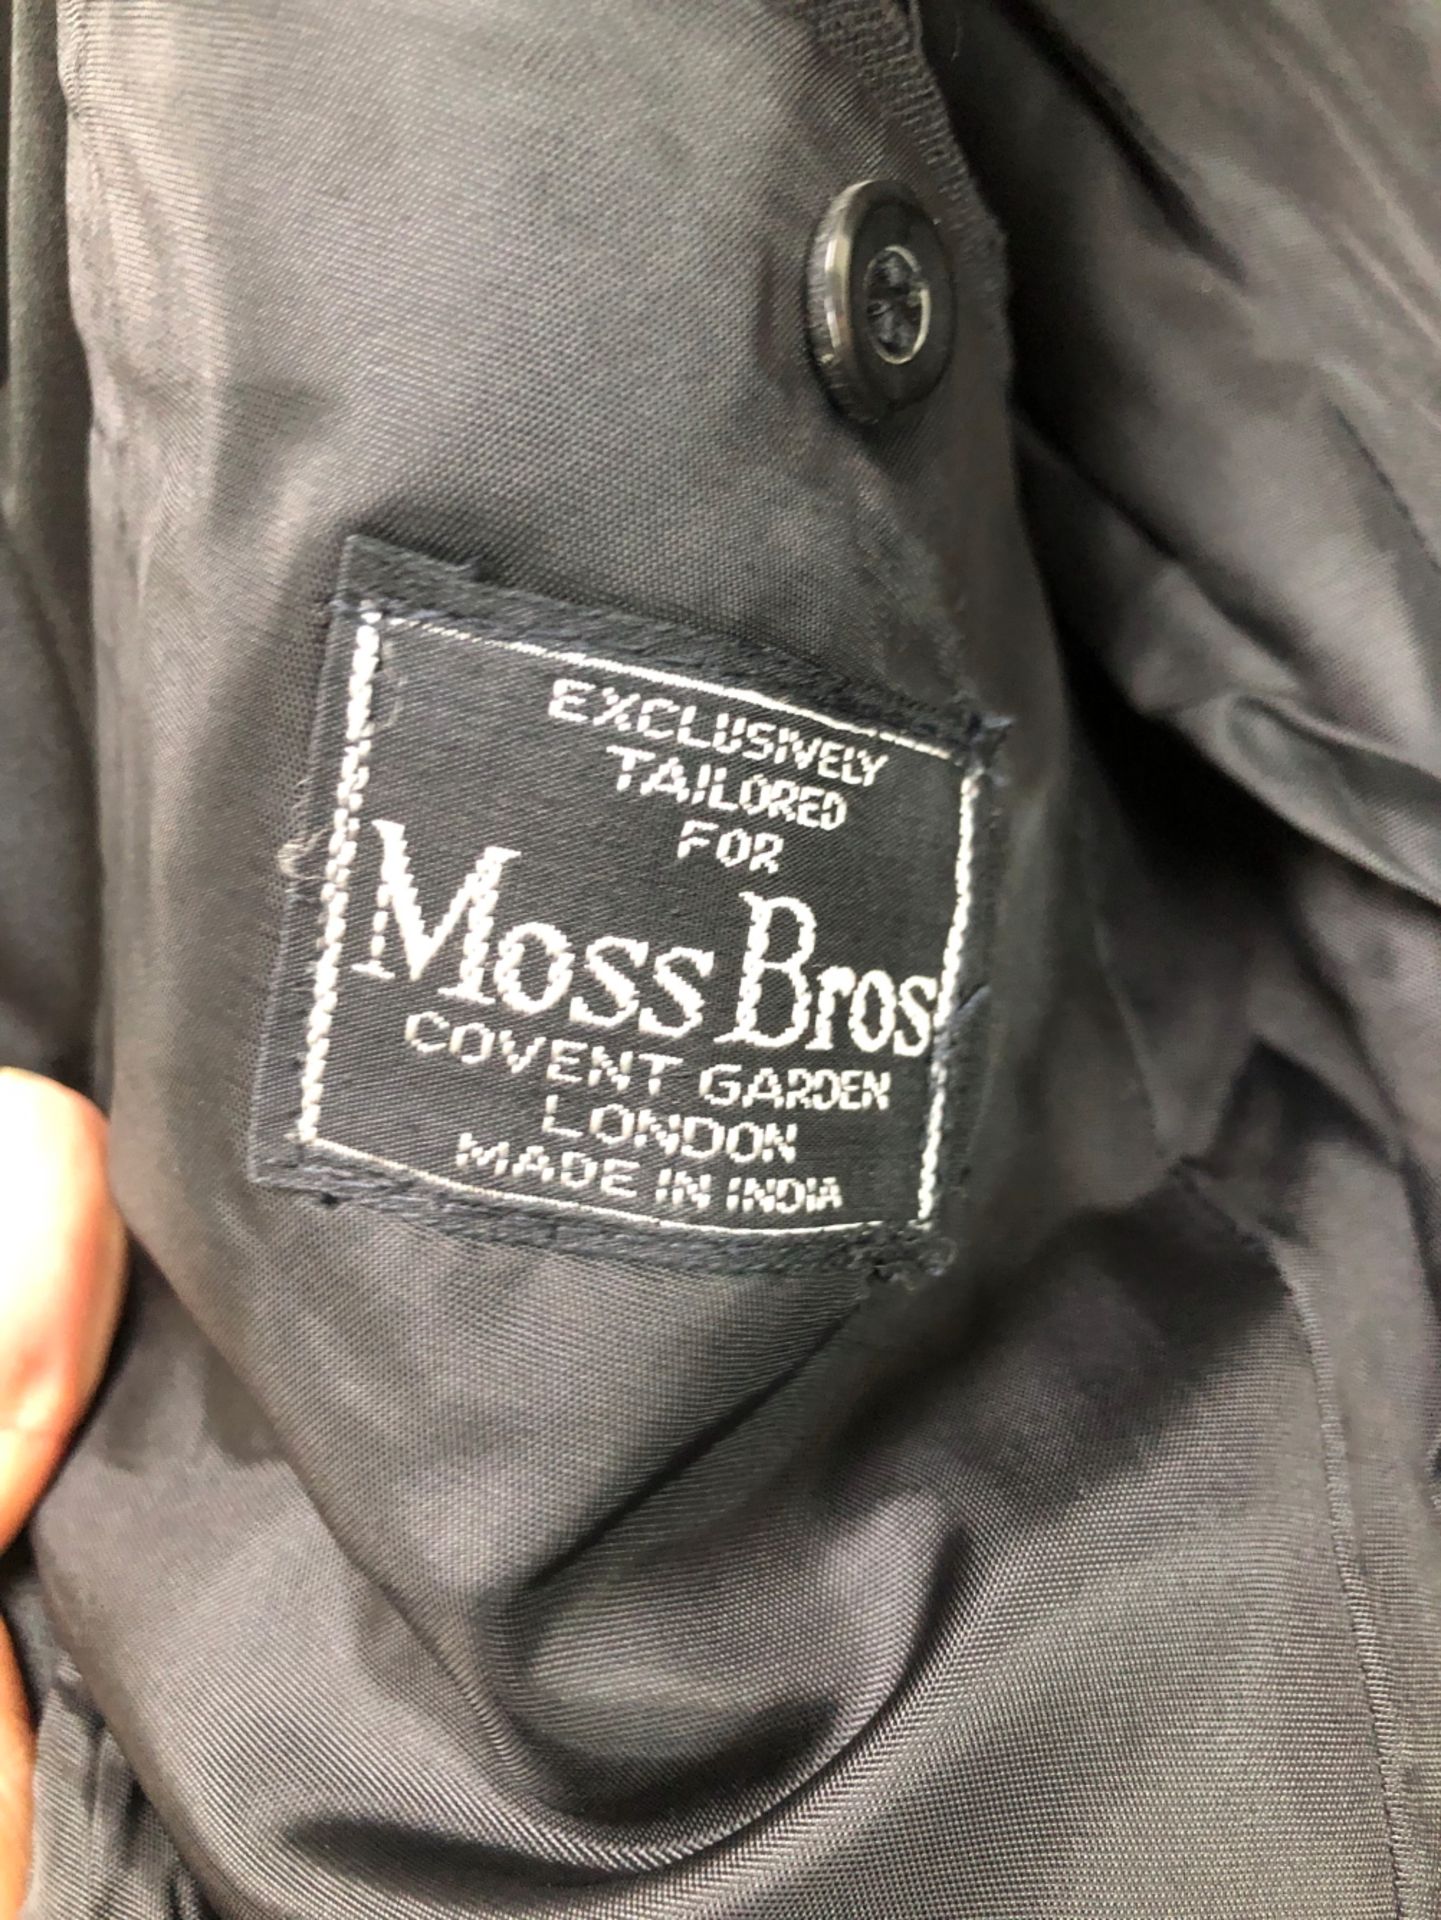 A MOSS BROS COVENT GARDEN DINNER SUIT JACKET SIZE 38 R TROUSERS L 38 (2) - Image 2 of 6